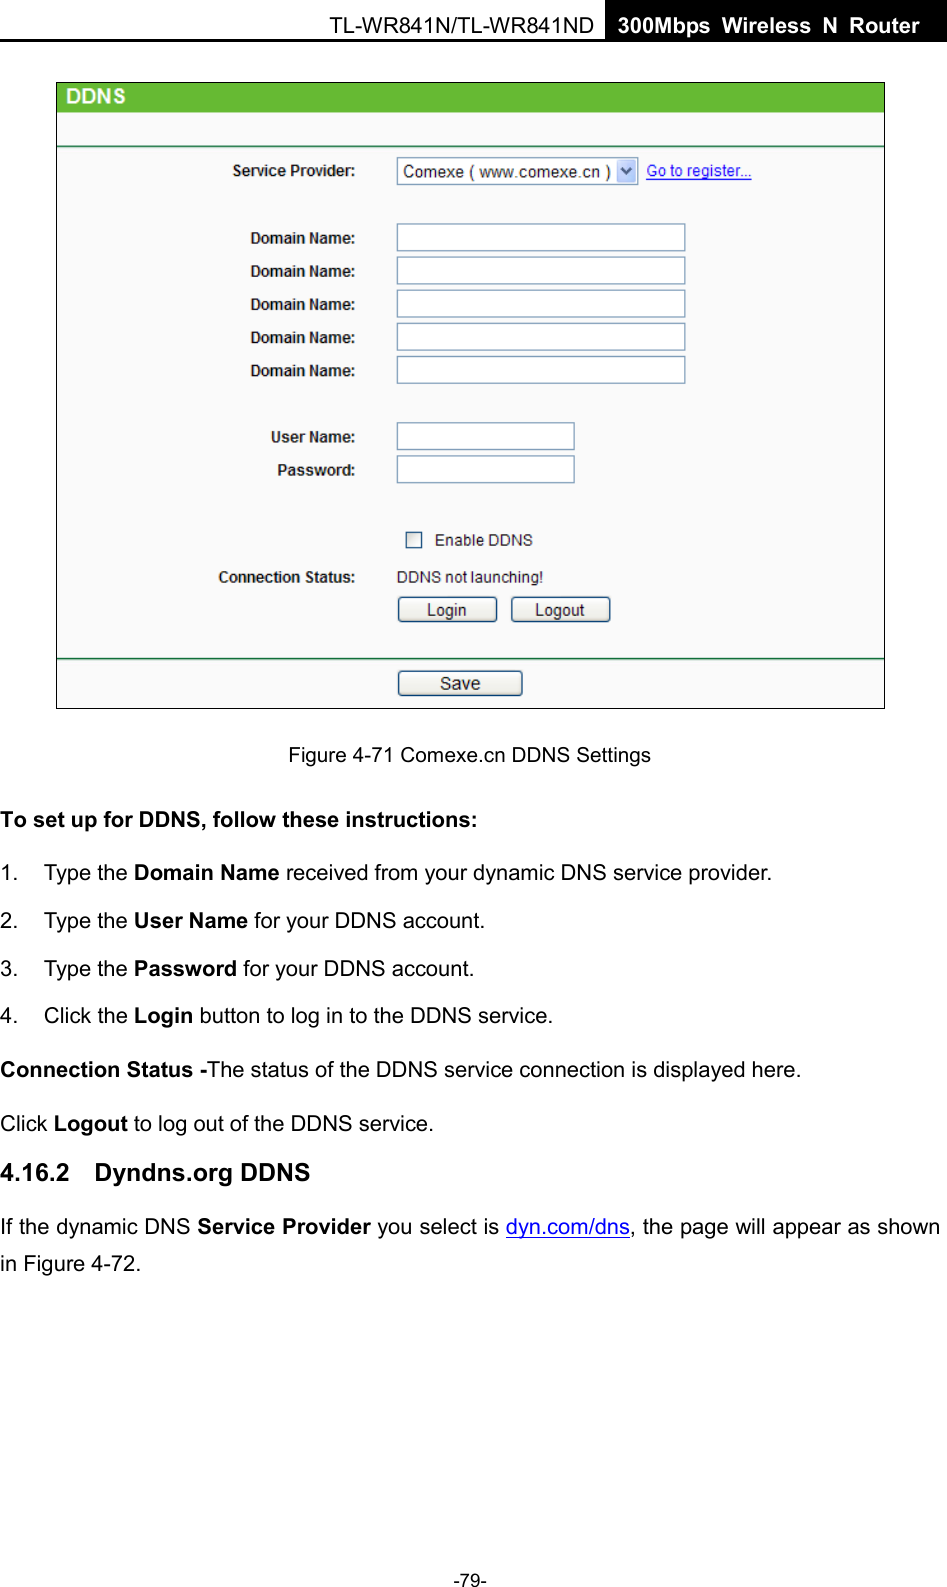  TL-WR841N/TL-WR841ND  300Mbps Wireless N Router     Figure 4-71 Comexe.cn DDNS Settings To set up for DDNS, follow these instructions: 1. Type the Domain Name received from your dynamic DNS service provider.     2. Type the User Name for your DDNS account.   3. Type the Password for your DDNS account.   4. Click the Login button to log in to the DDNS service. Connection Status -The status of the DDNS service connection is displayed here. Click Logout to log out of the DDNS service.   4.16.2 Dyndns.org DDNS If the dynamic DNS Service Provider you select is dyn.com/dns, the page will appear as shown in Figure 4-72. -79- 